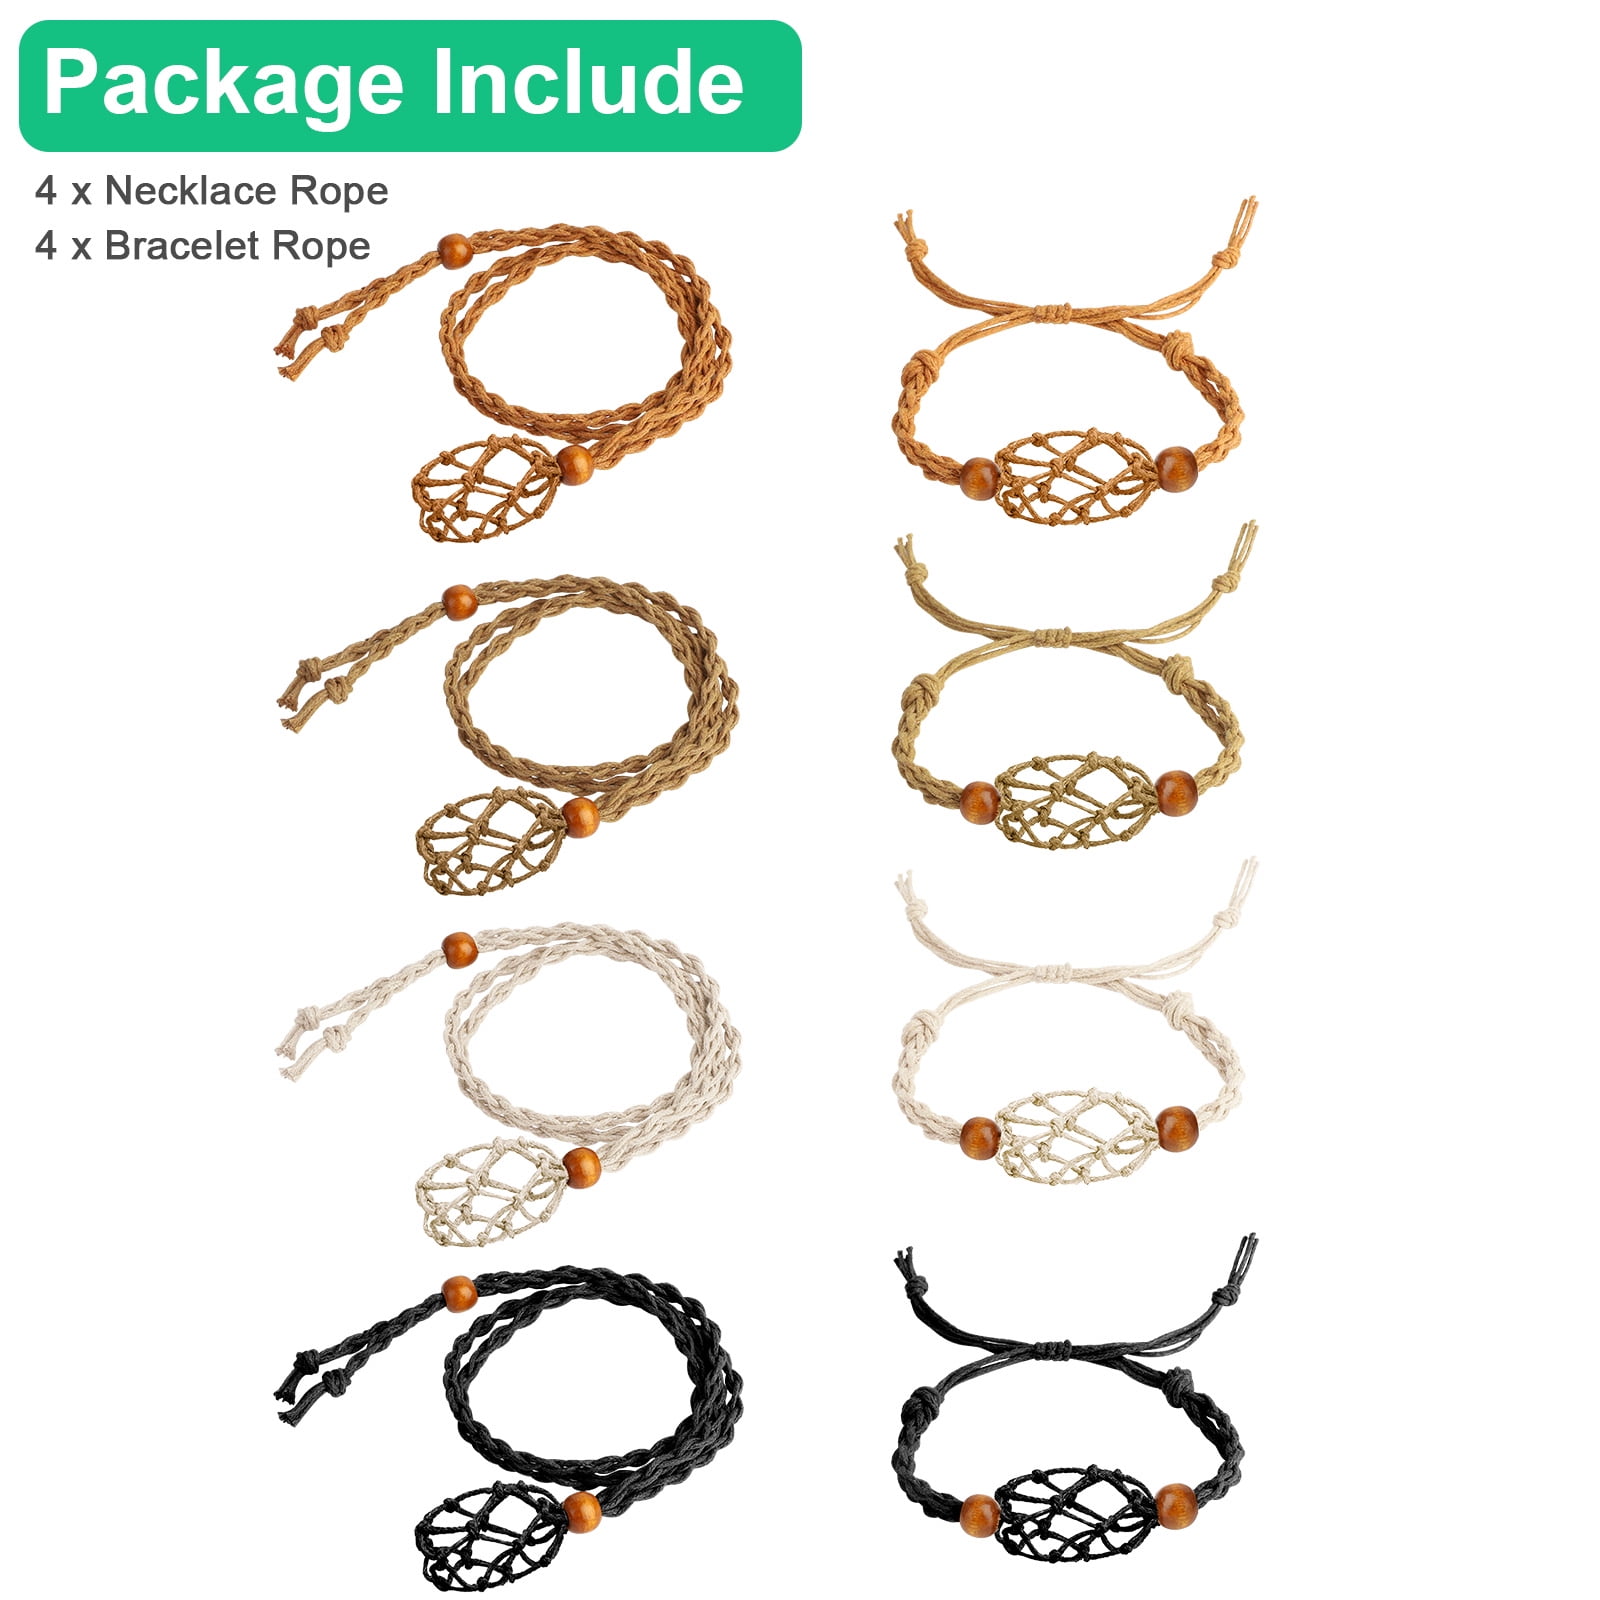  TEHAUX Flat Pu Rope Jewelry Necklace Flat Leather Cords Beading  Threads Waxed Leather Cord Rope Flat Pu Leather Rope Leather Bracelet  Making Kit Necklace Cord Bulk to Weave Beads